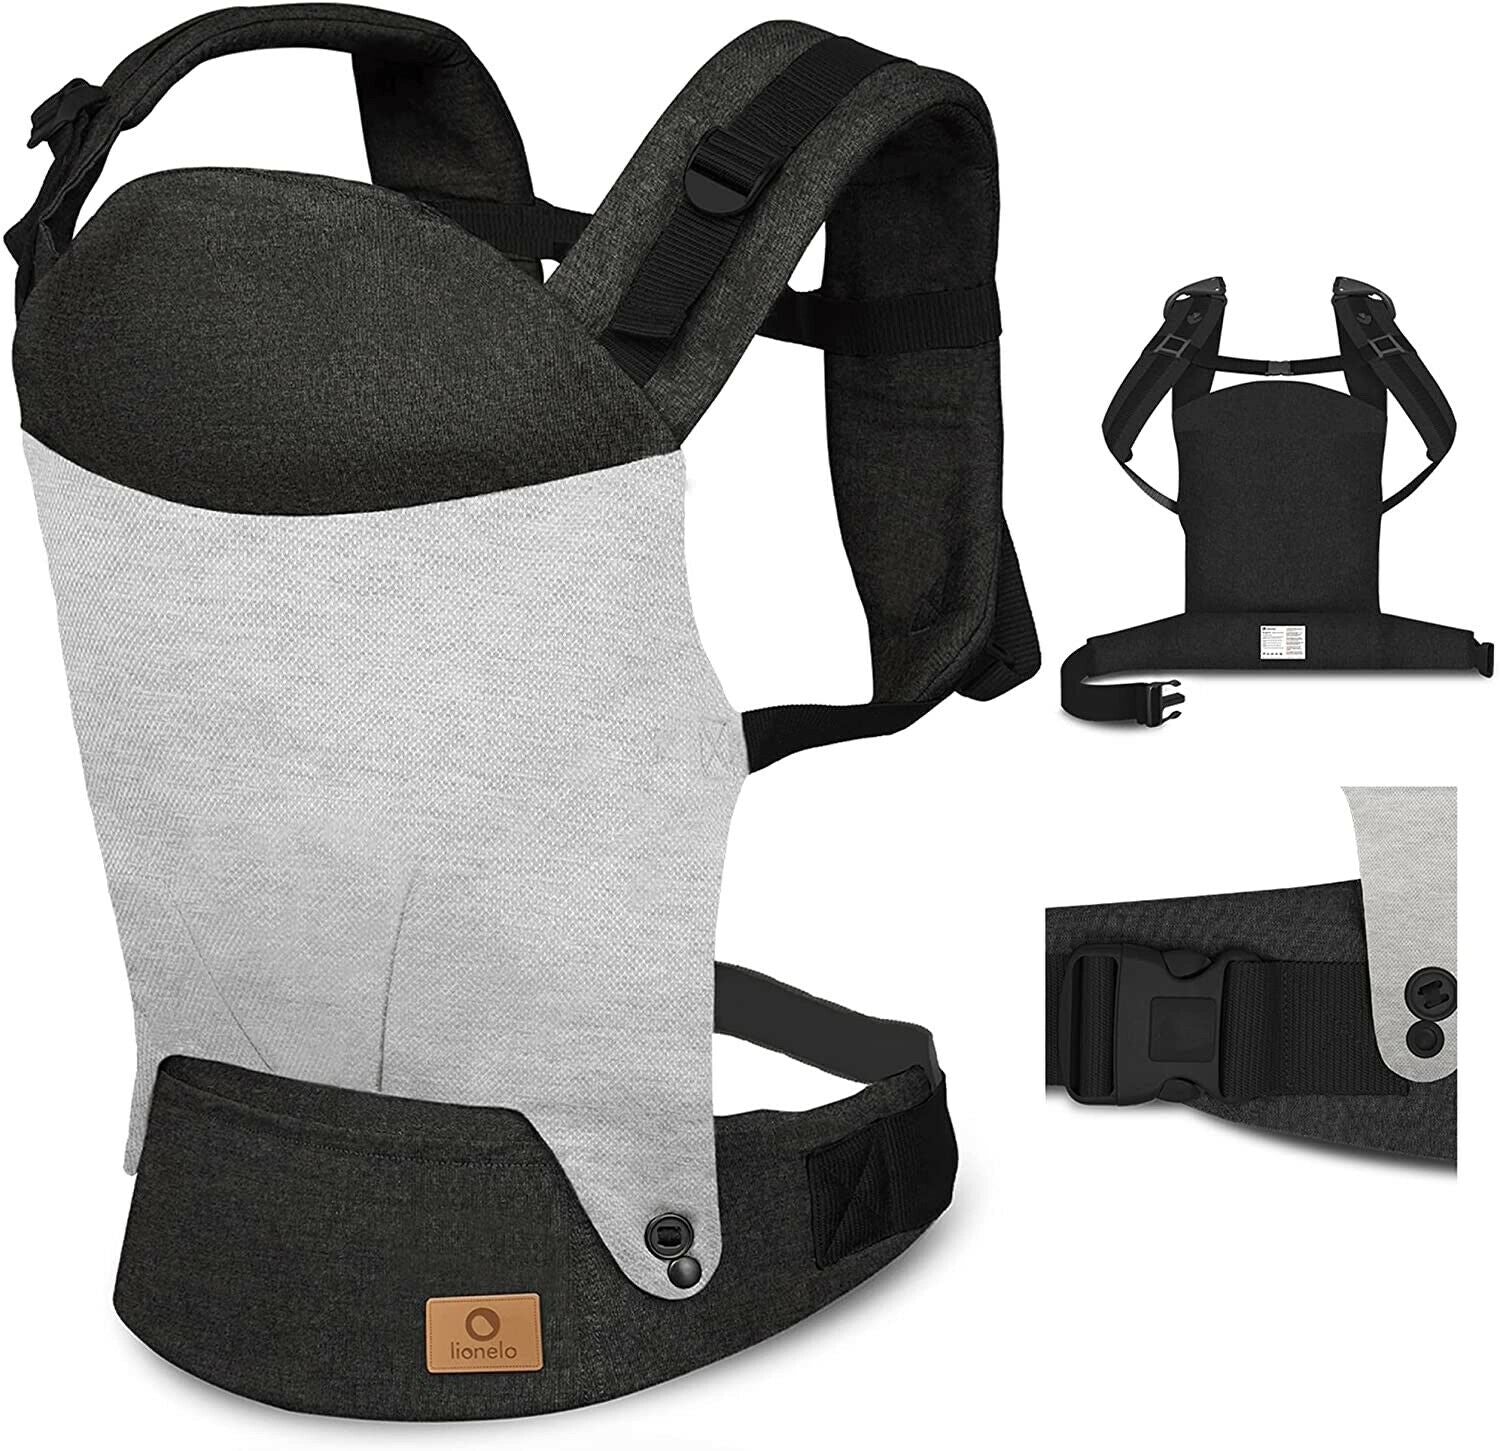 Lionelo Baby Carrier Margareet 3 Carrying Positions Belt Urban Gray